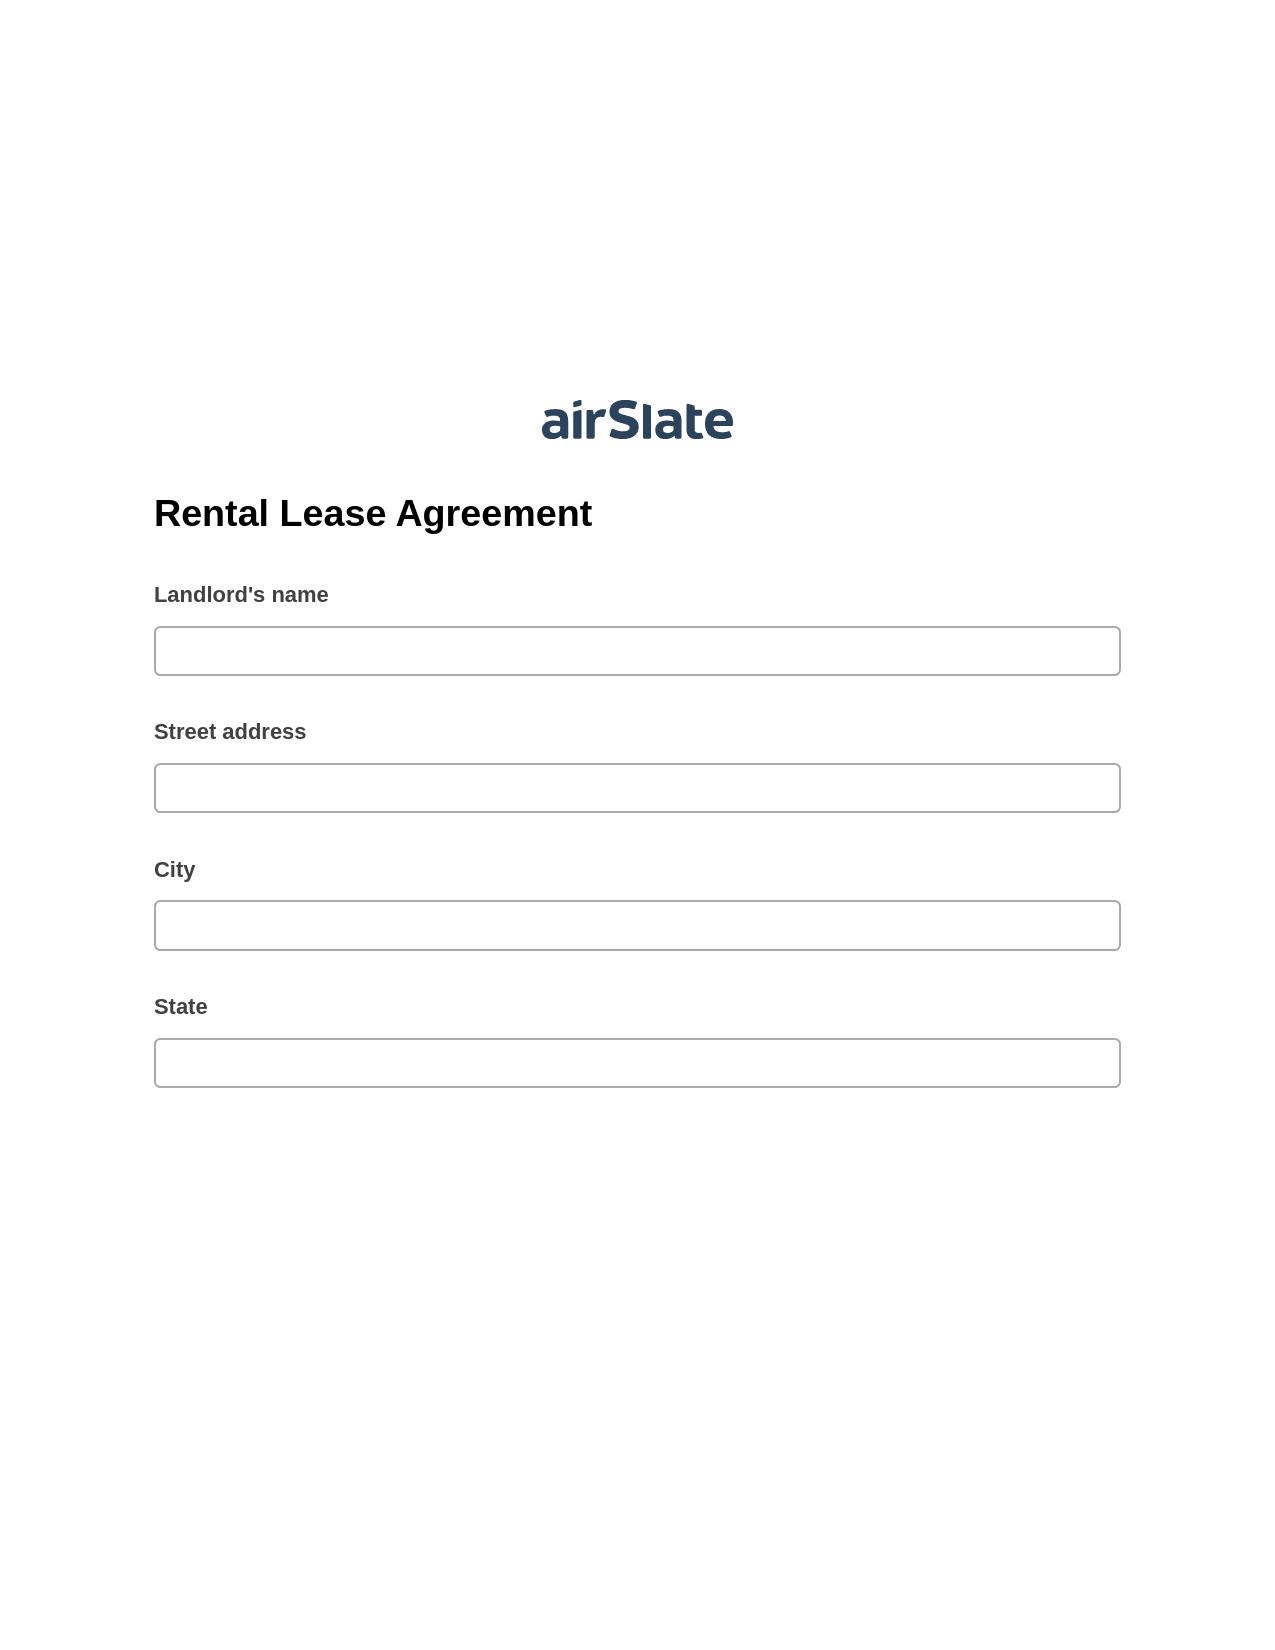 Multirole Rental Lease Agreement Pre-fill Slate from MS Dynamics 365 Records Bot, Jira Bot, Export to Google Sheet Bot